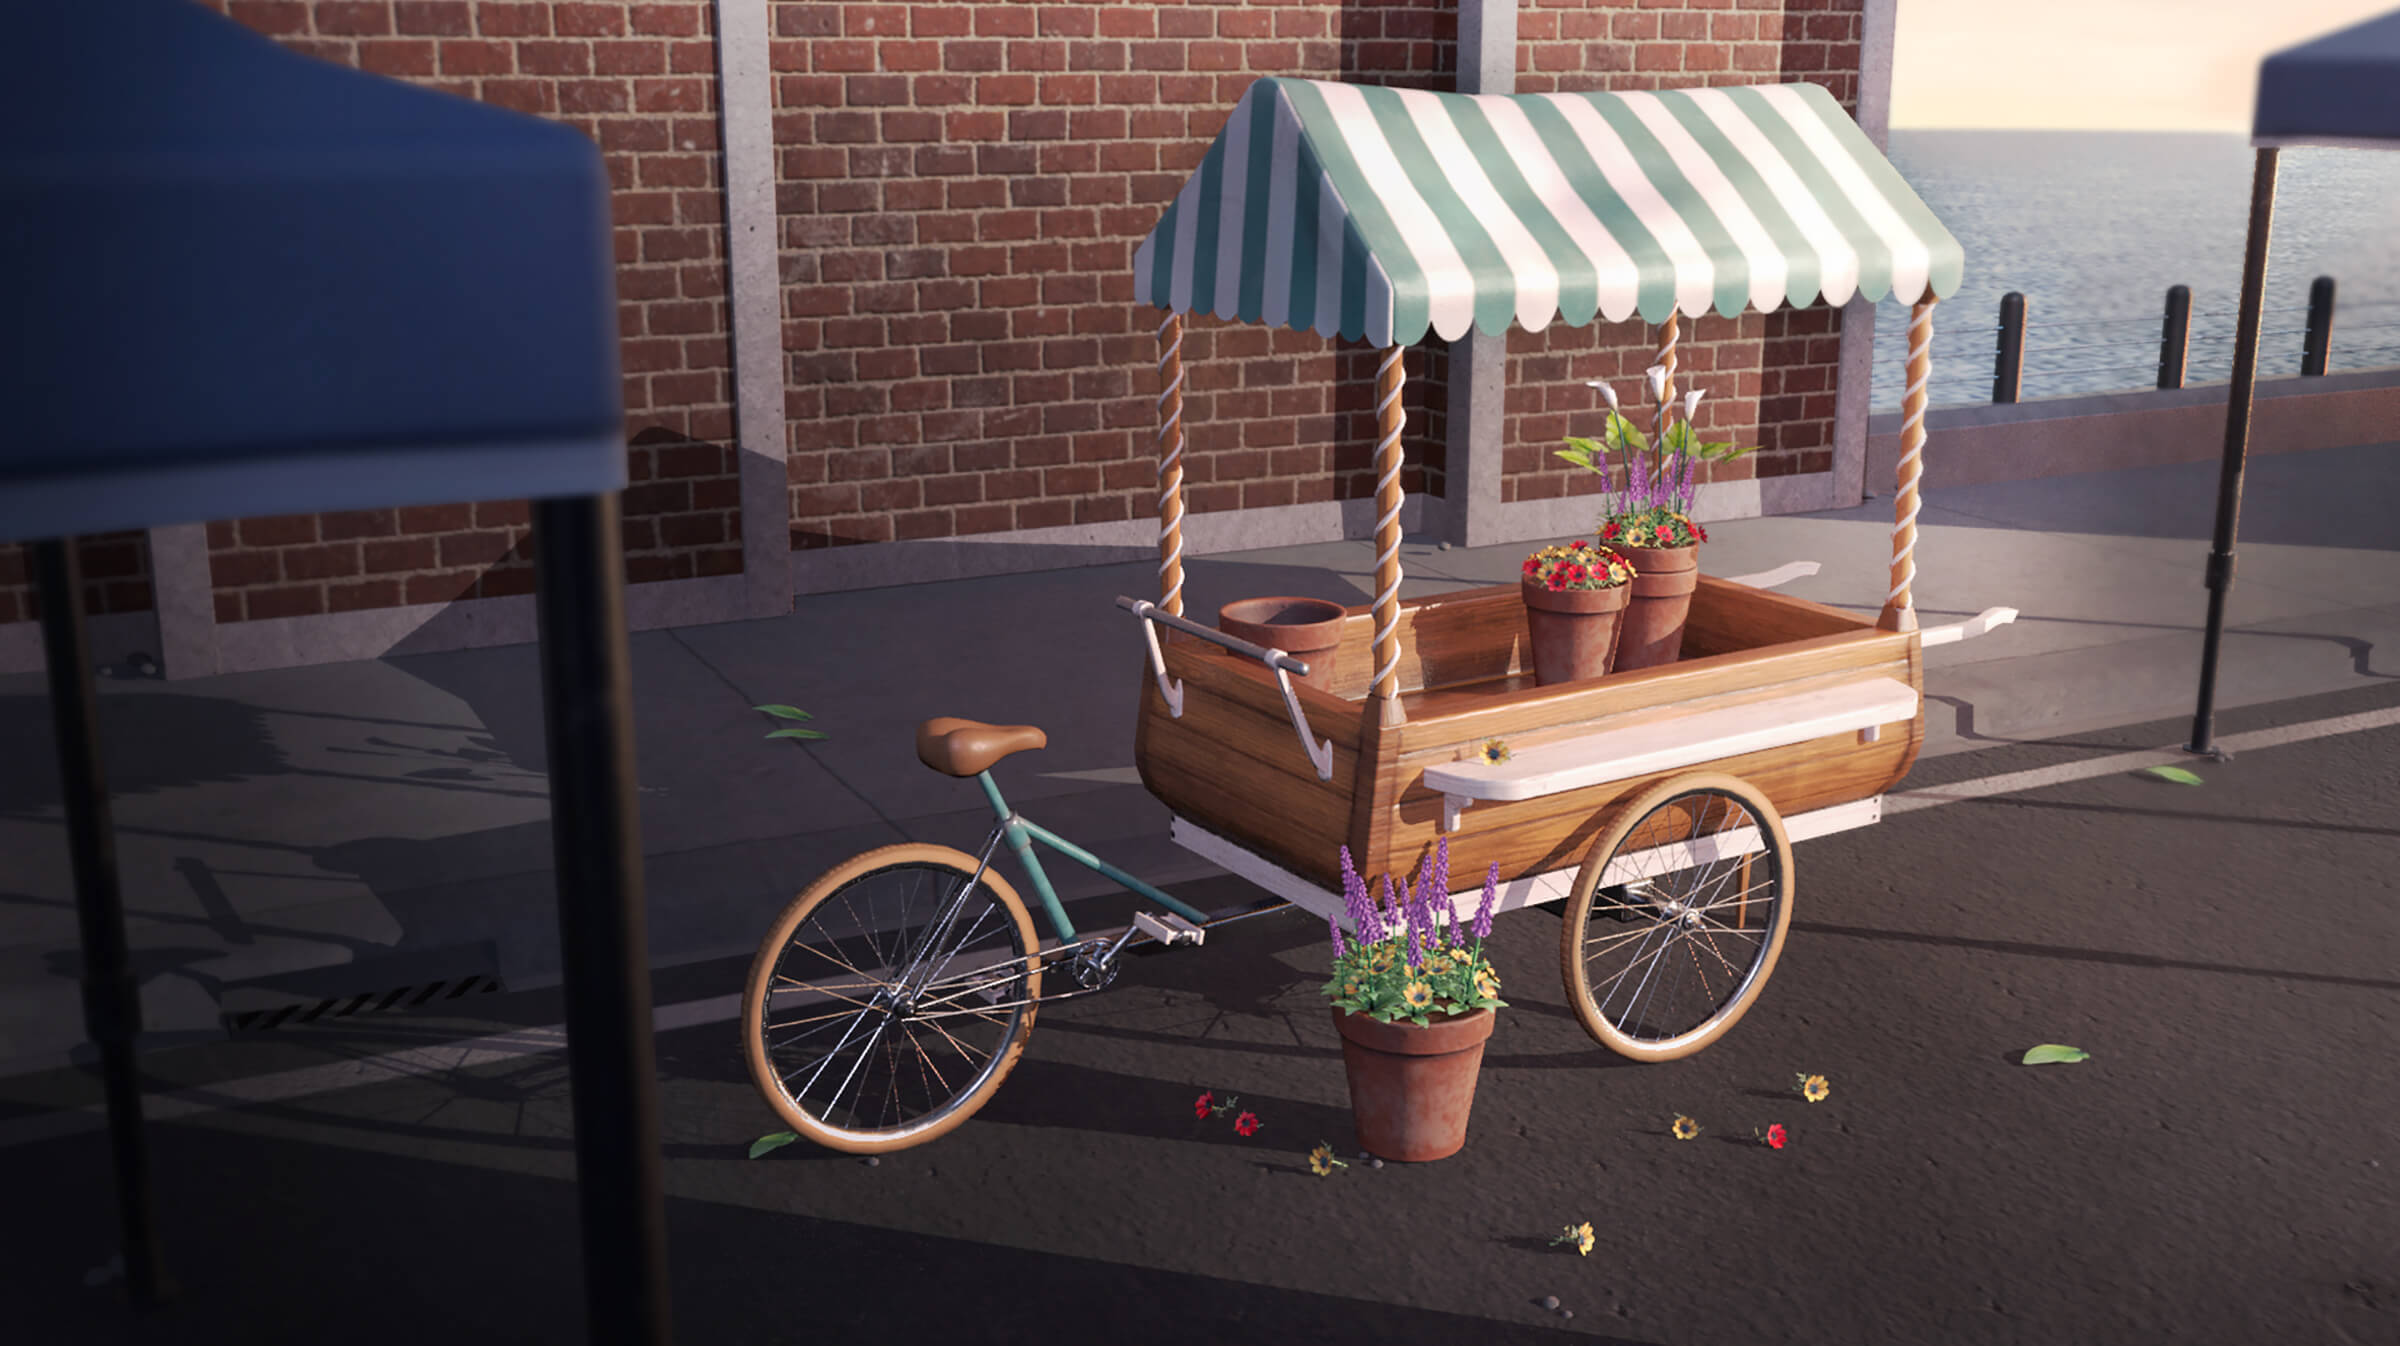 A bicycle with a cart attached carrying potted flowers